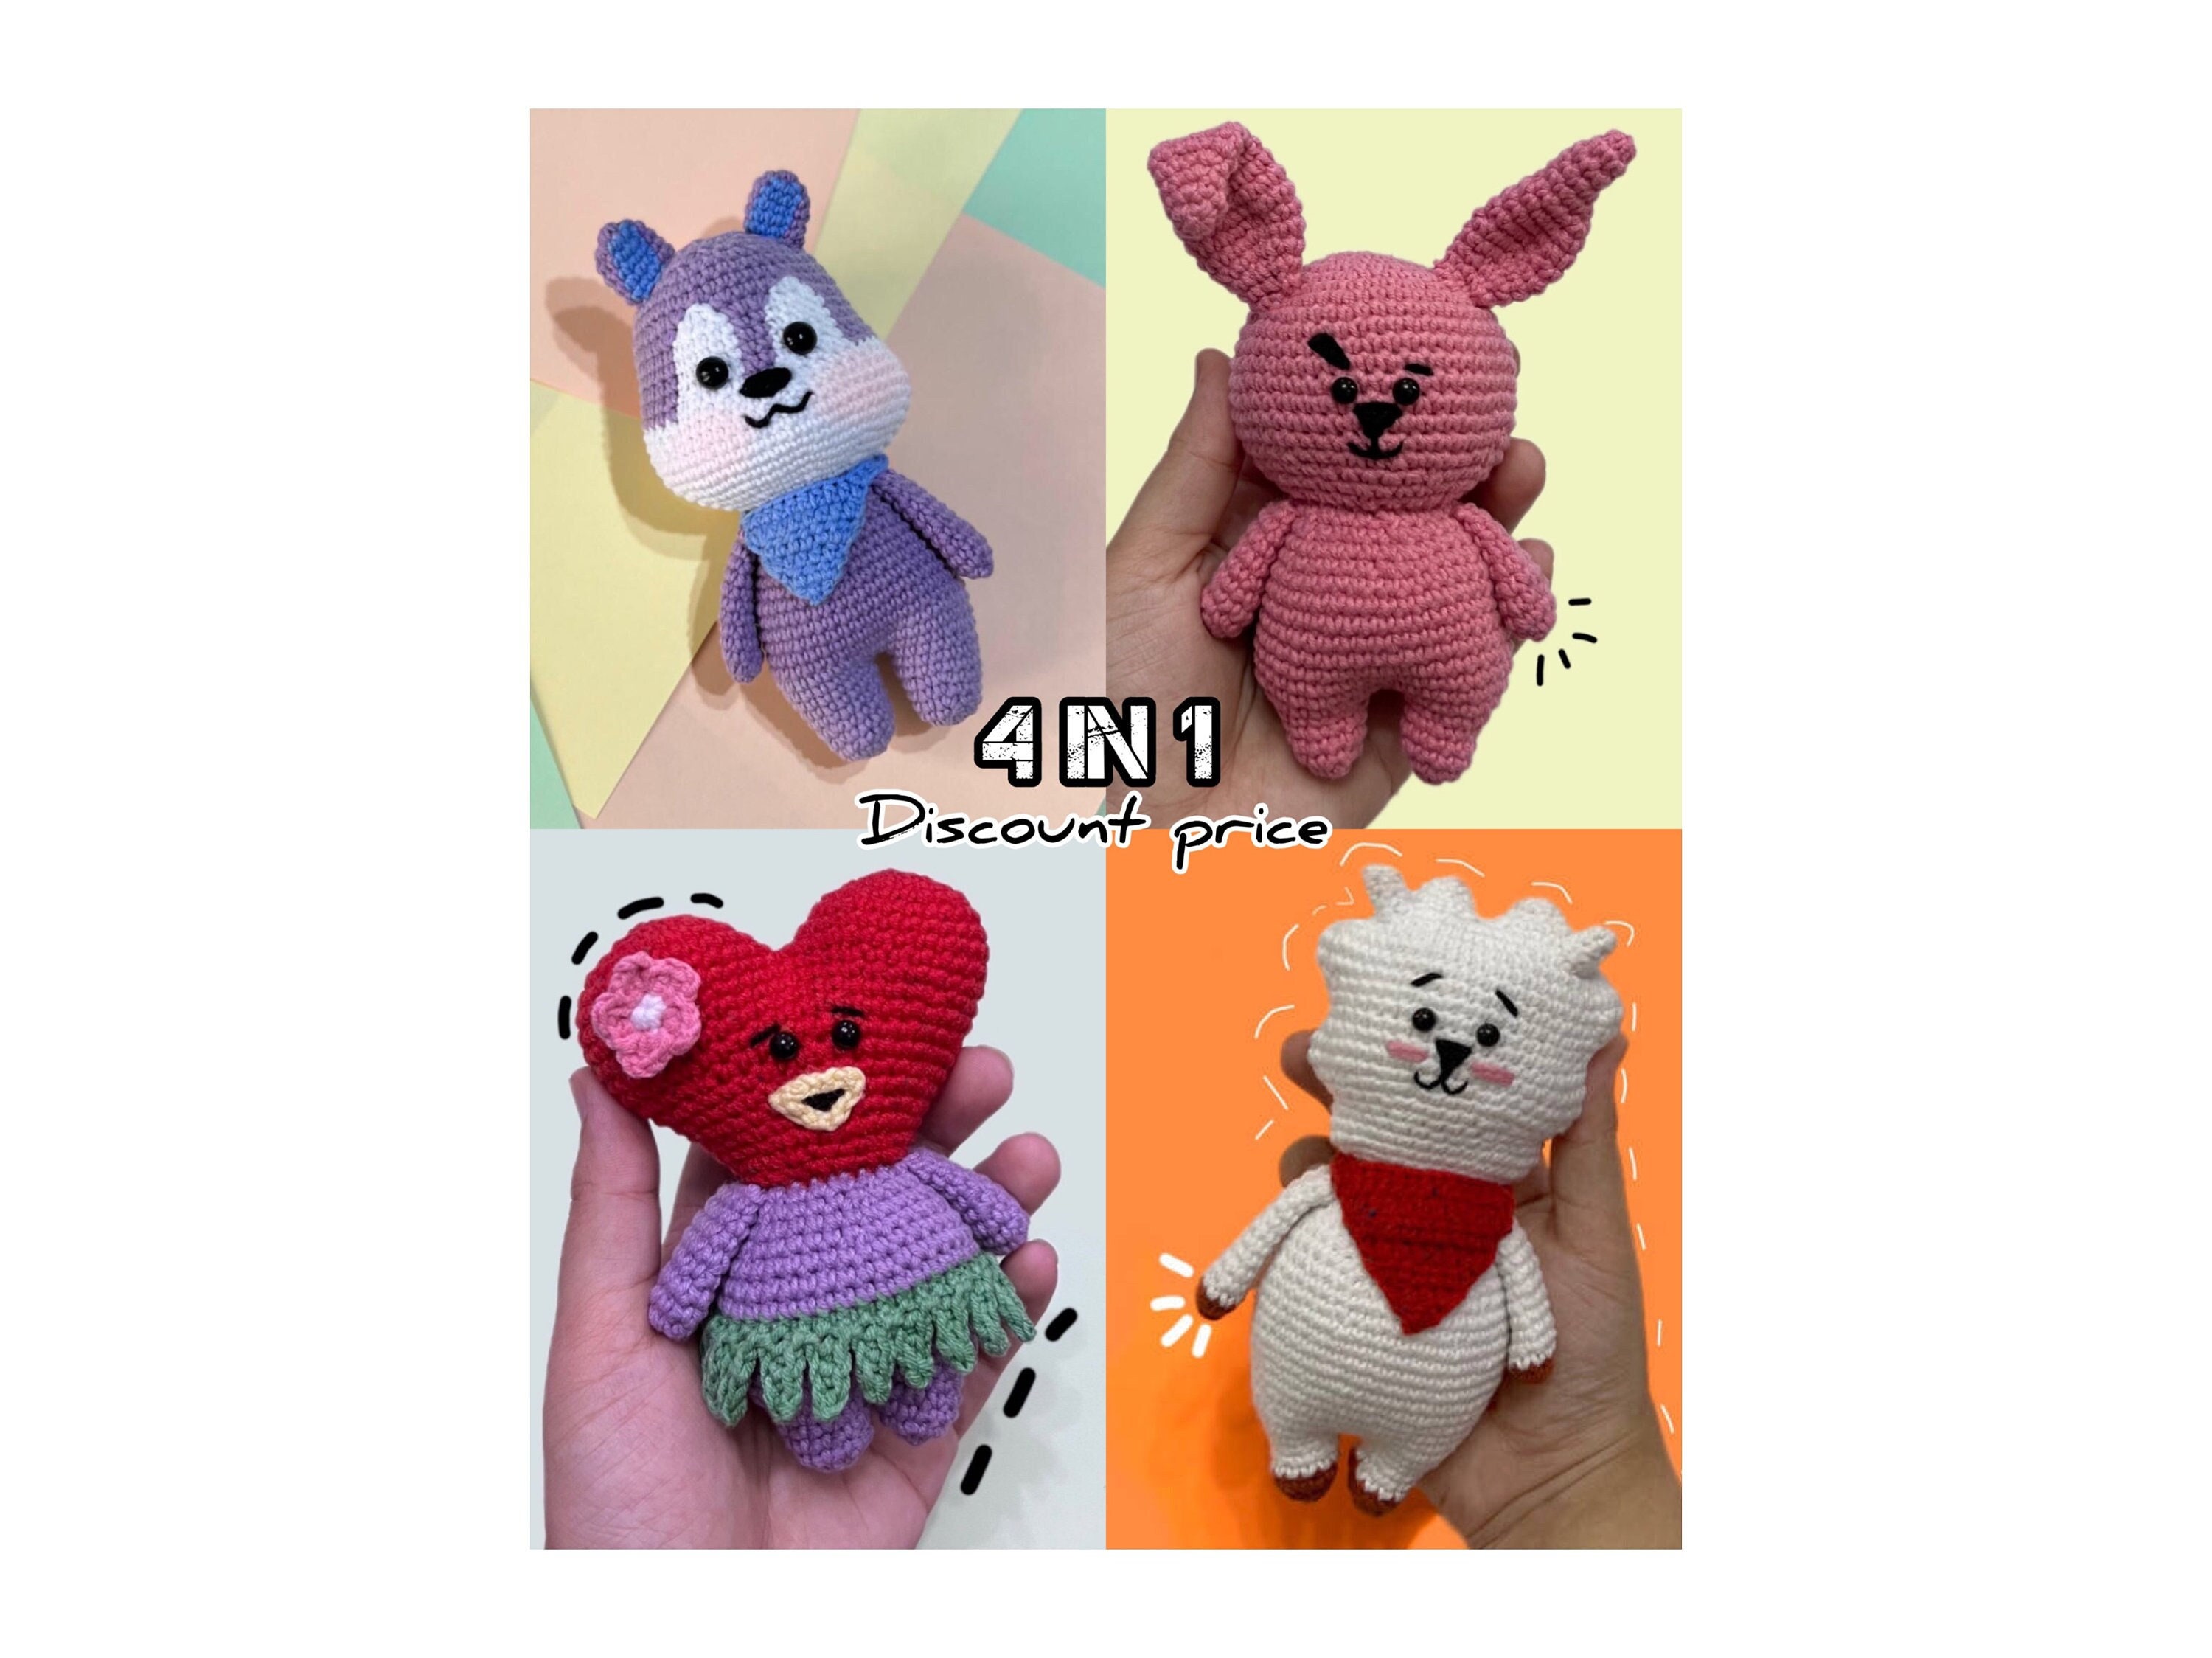 Mang From BT21 & the Woobles Collab Crochet Plushie 